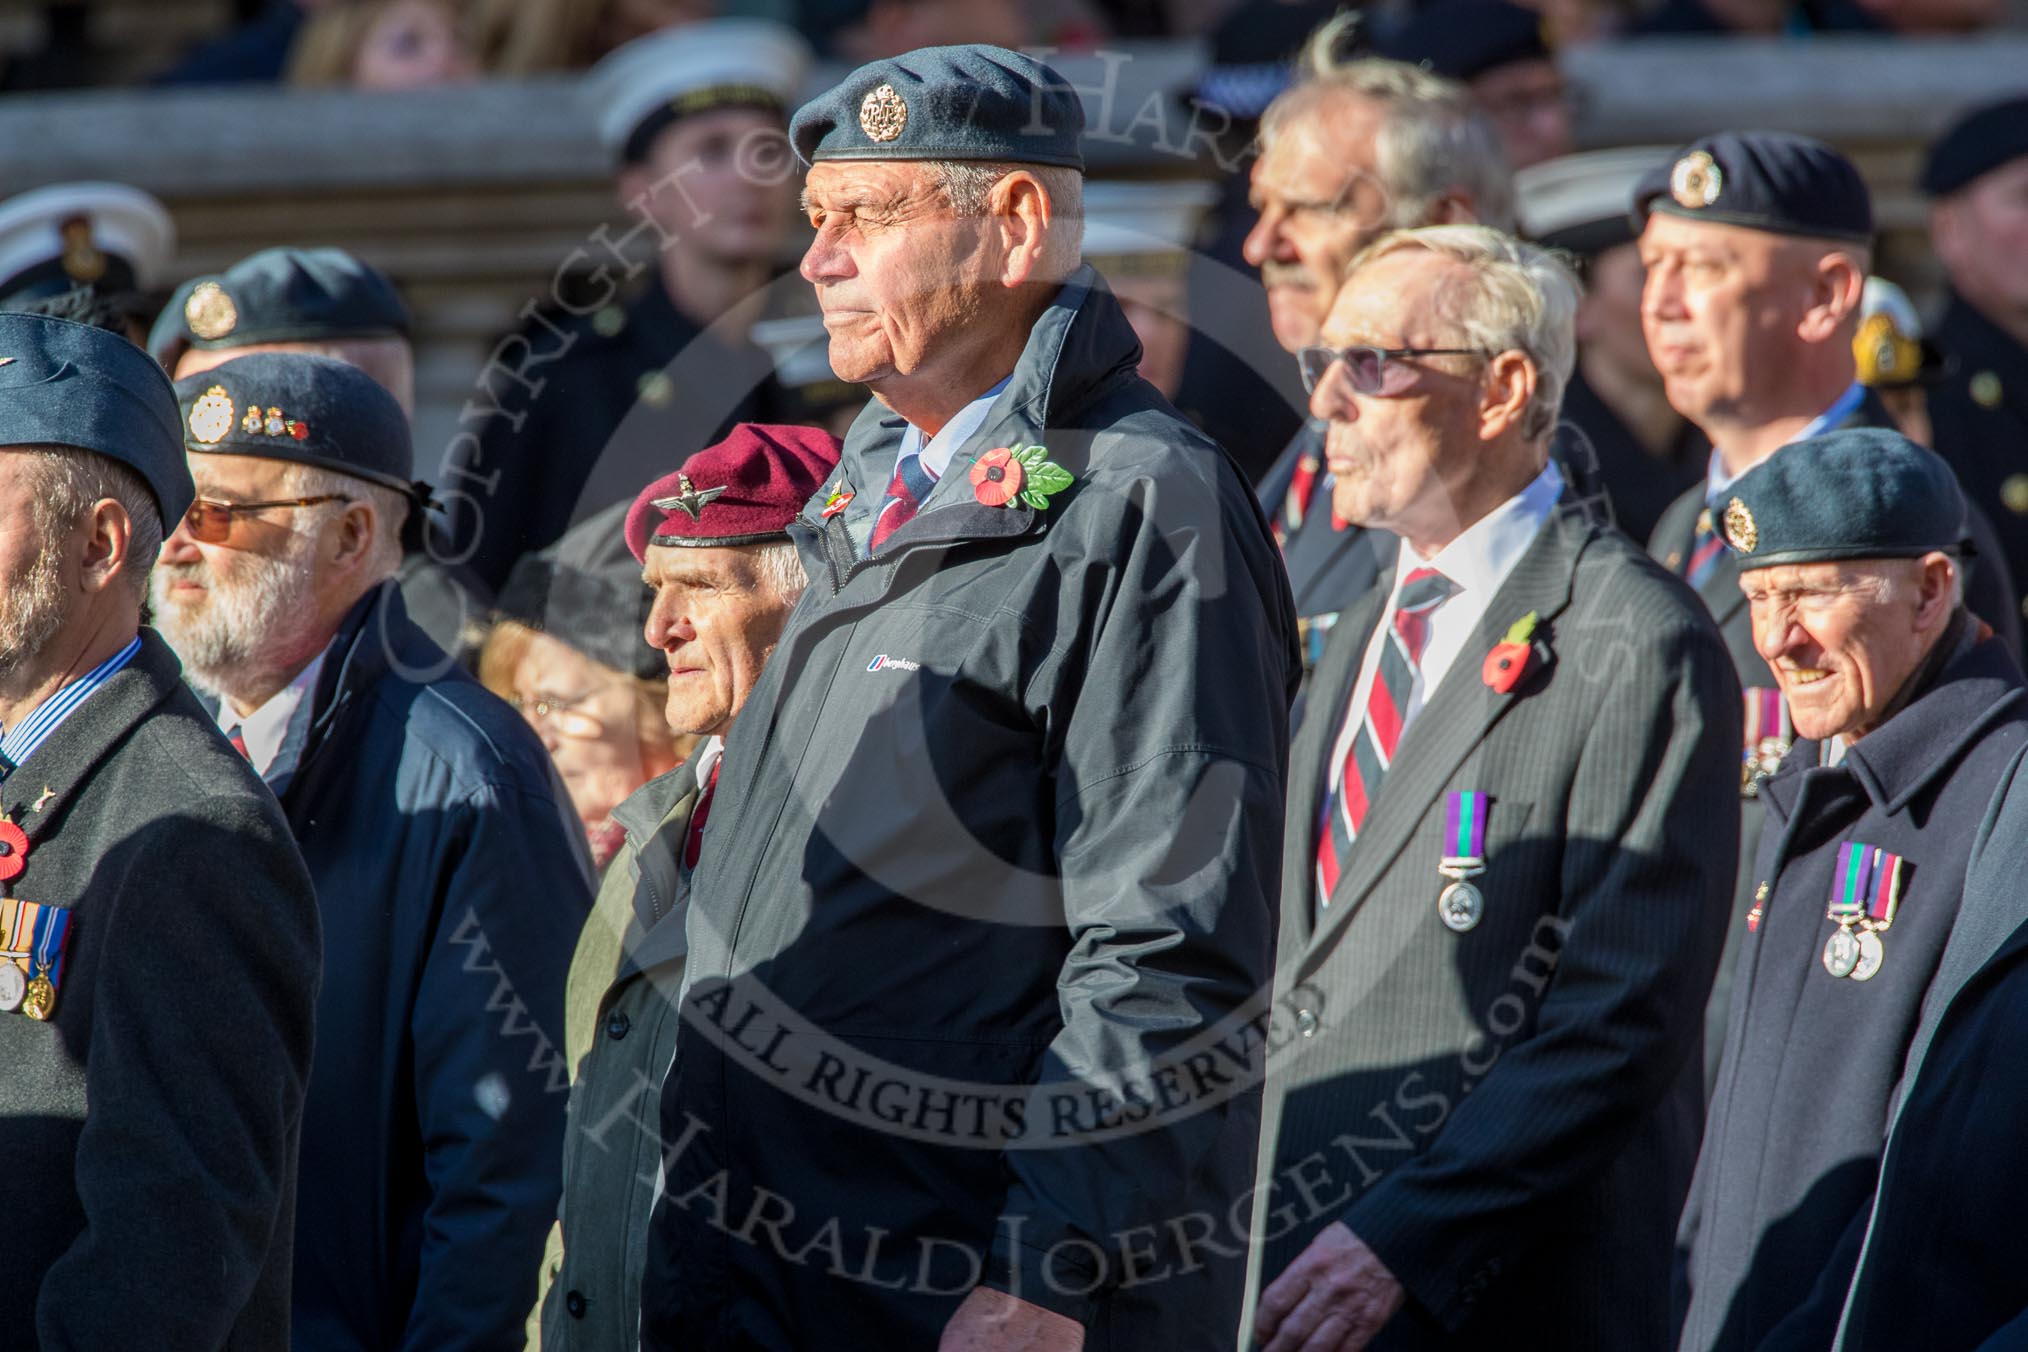 Royal Air Forces Association (Group C1, 155 members) during the Royal British Legion March Past on Remembrance Sunday at the Cenotaph, Whitehall, Westminster, London, 11 November 2018, 12:14.